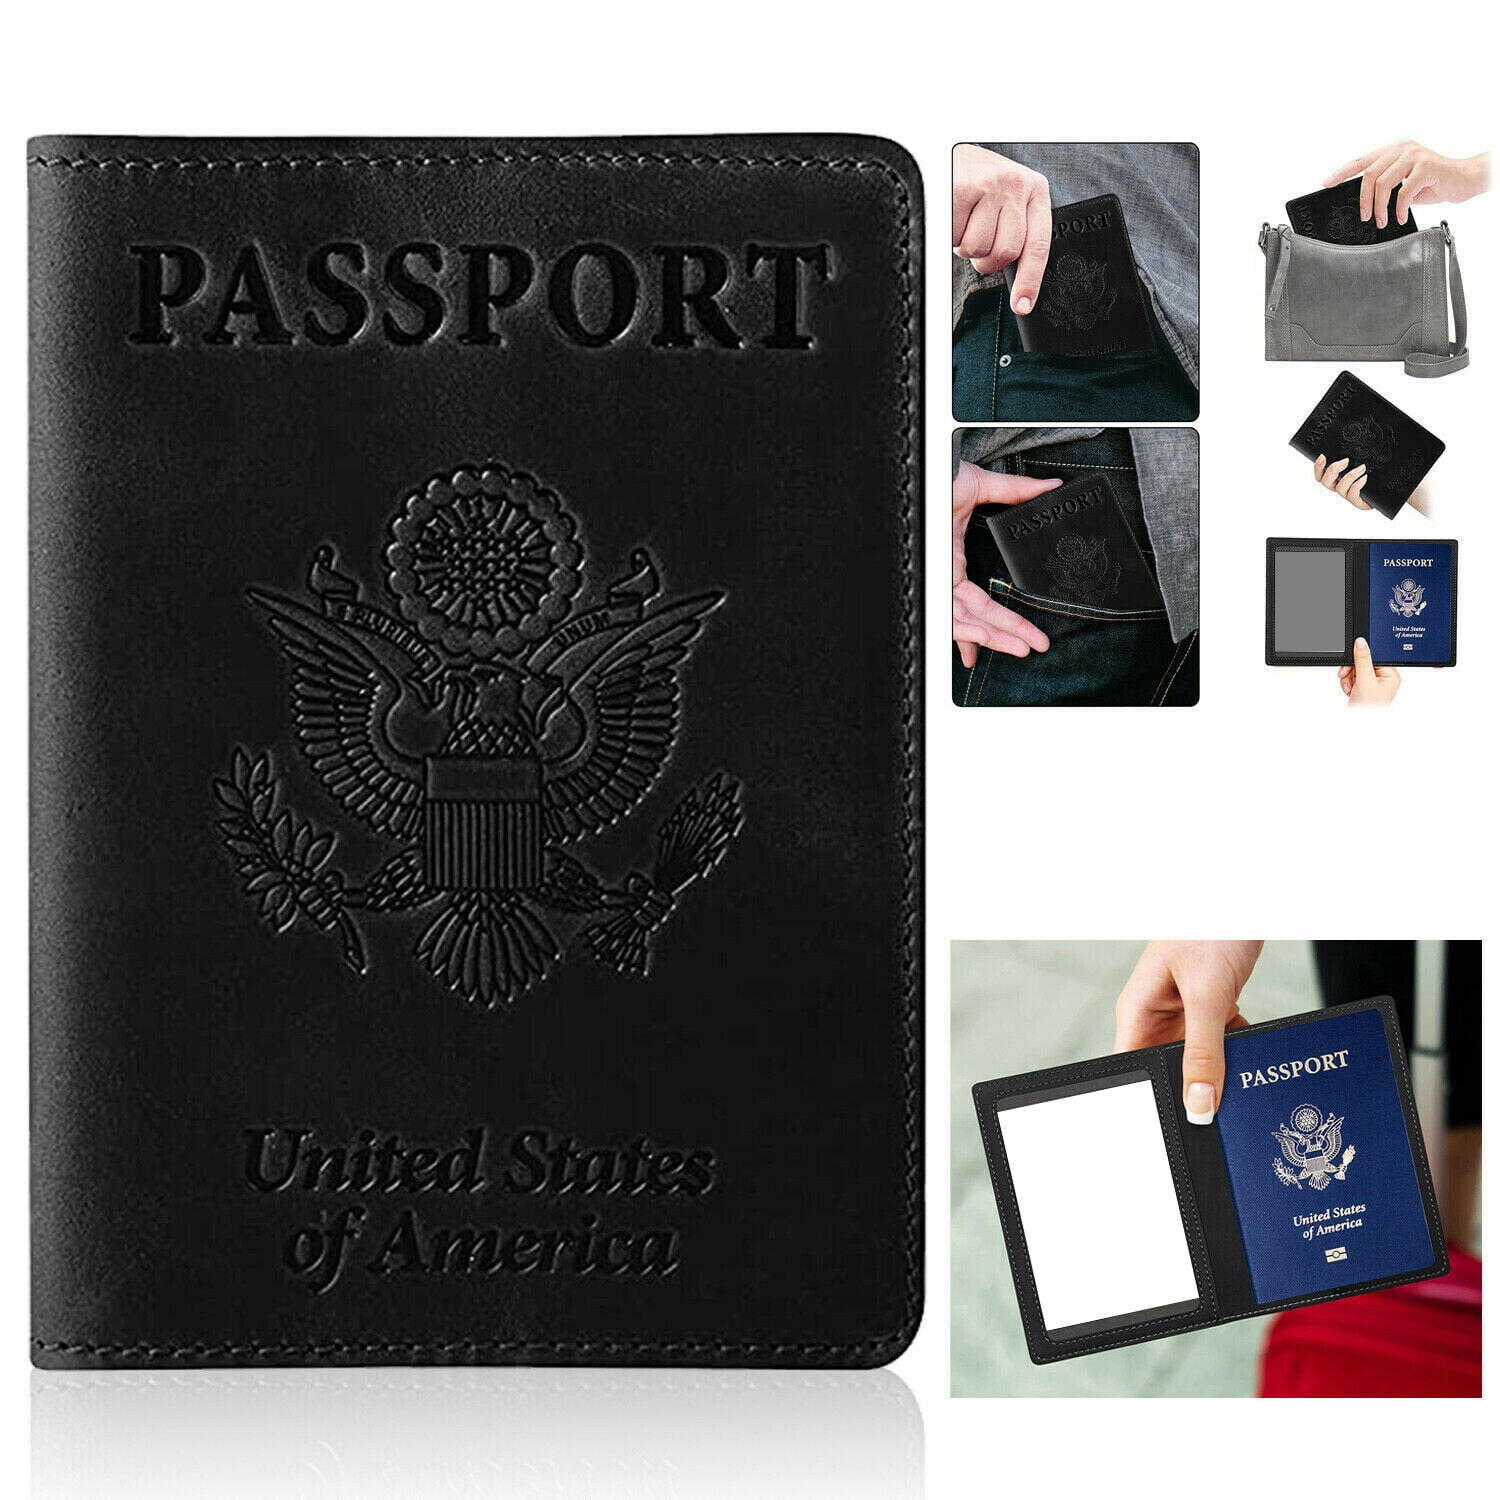 Passport Holder PU Leather Passport Cover Case Protective Passport Wallet Card Organizer for Travel 1PC